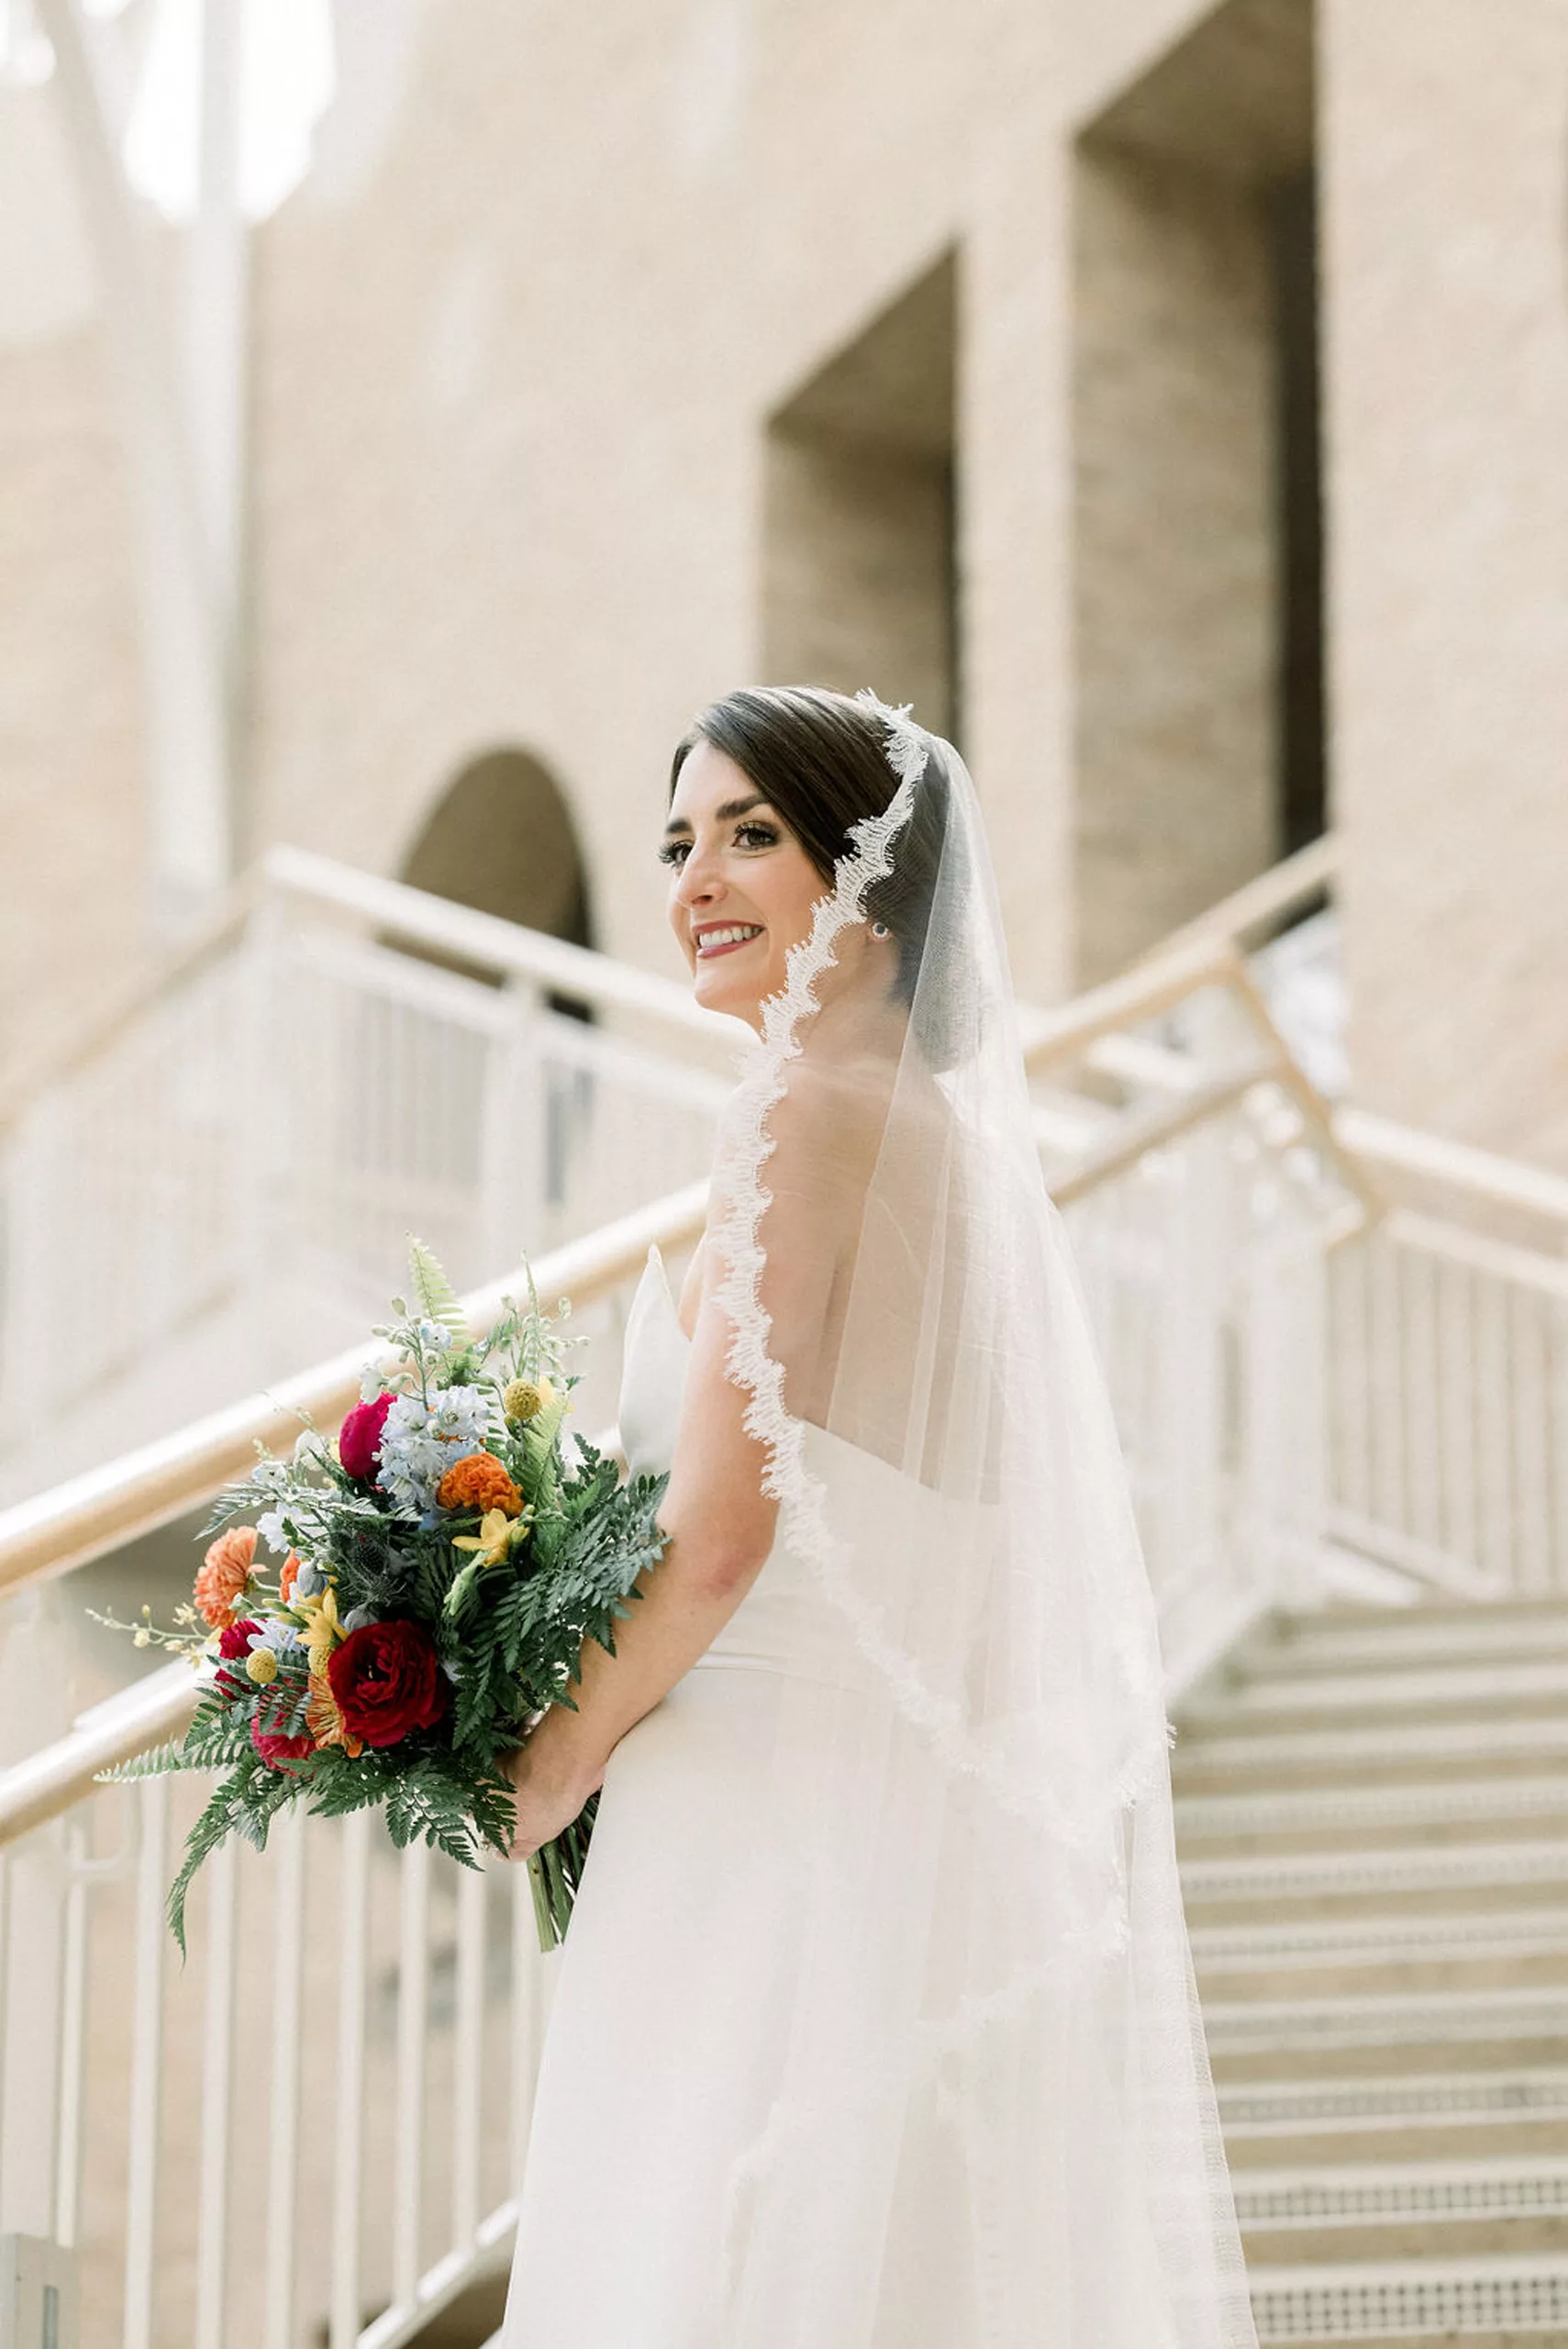 A bride walks up a set of stairs smiling over her shoulder in a museum holding her fern and colorful flower bouquet